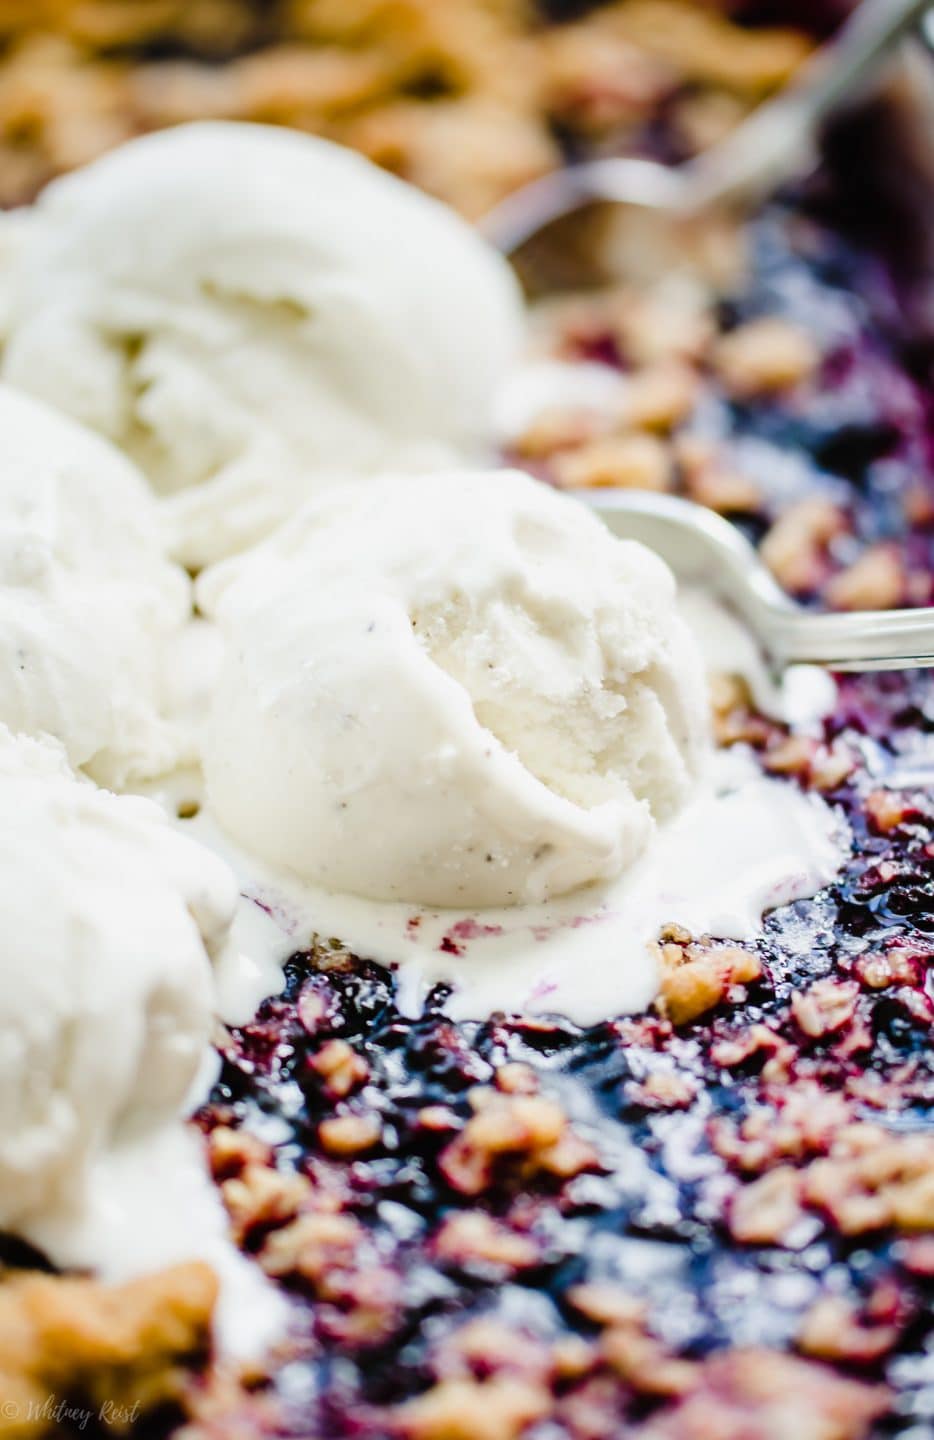 A scoop of ice cream melting on top of a dish of mixed berry crumble.